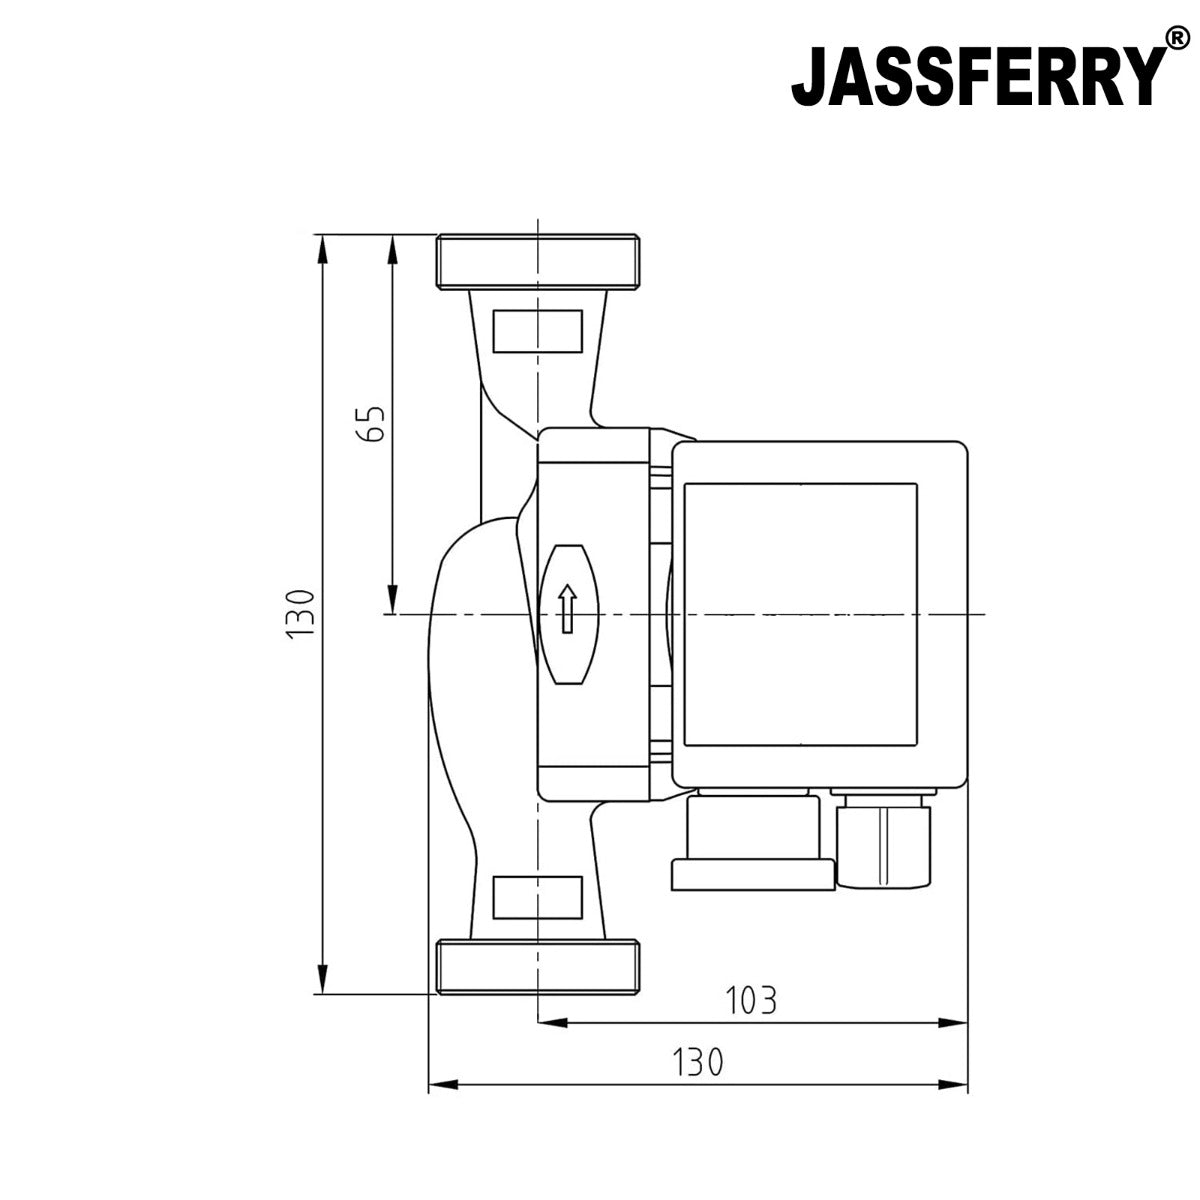 JASSFERRY A-Rated Central Heating Pump Energy Saving Hot Water Circulation Systems